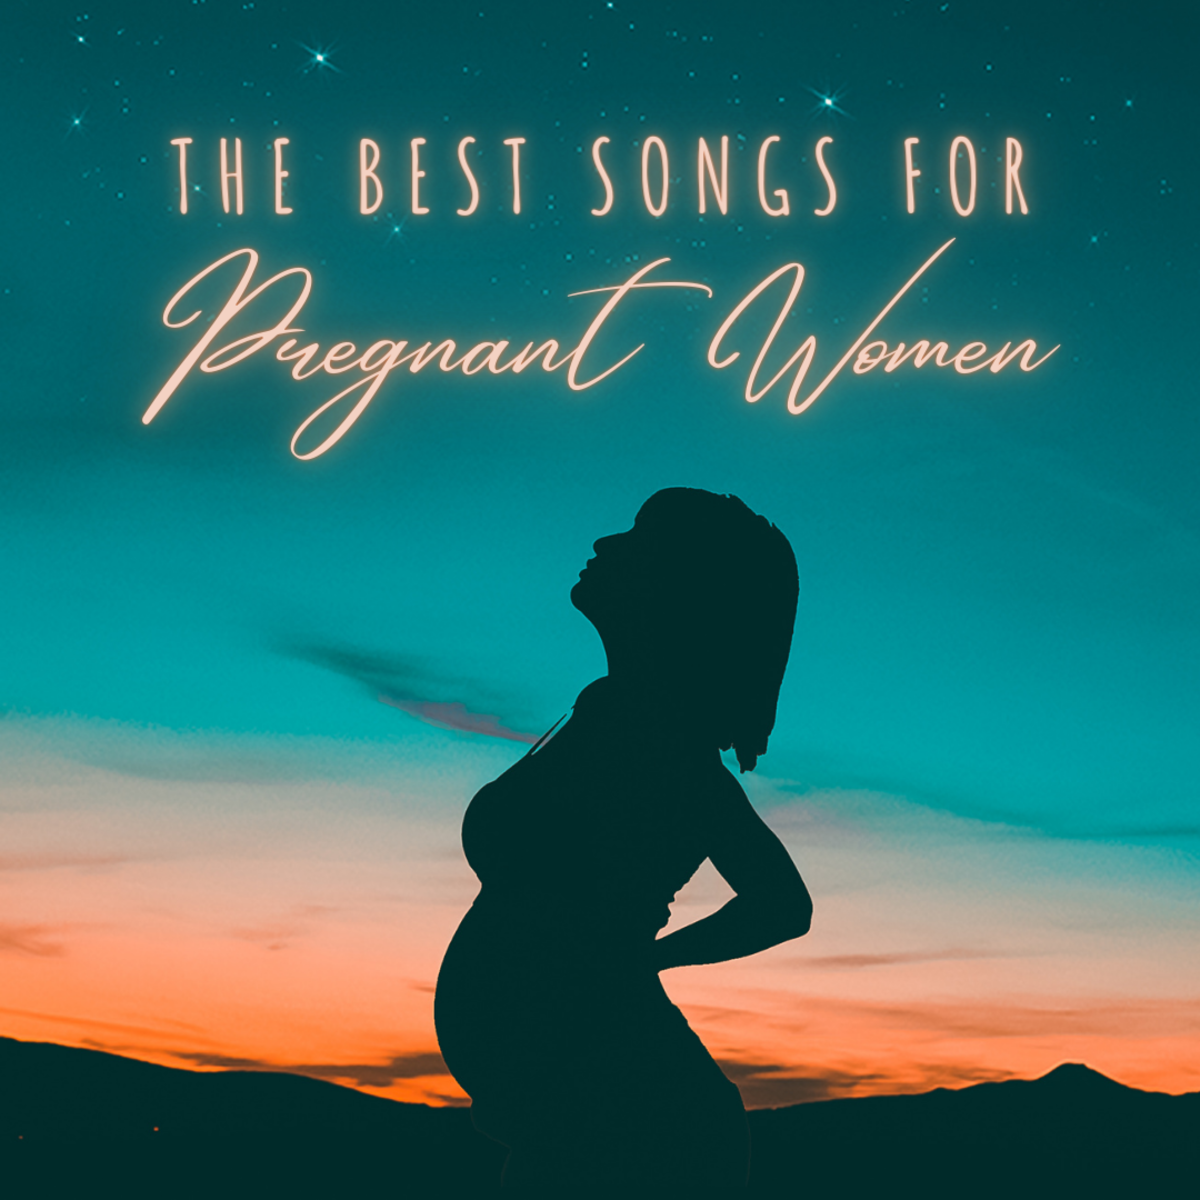 Read on to discover the best songs about pregnancy!